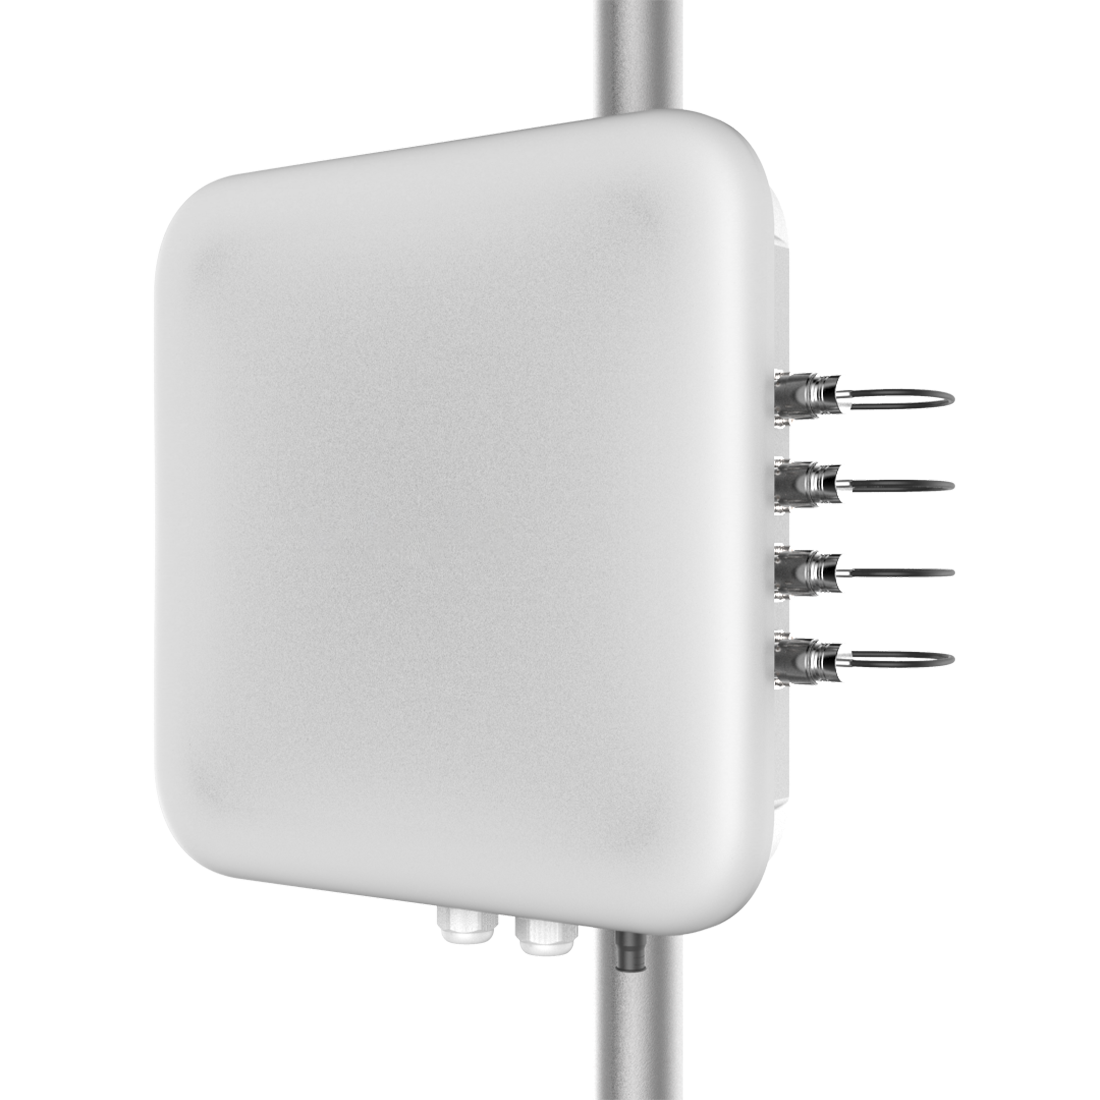 5G mmWave Small Cell